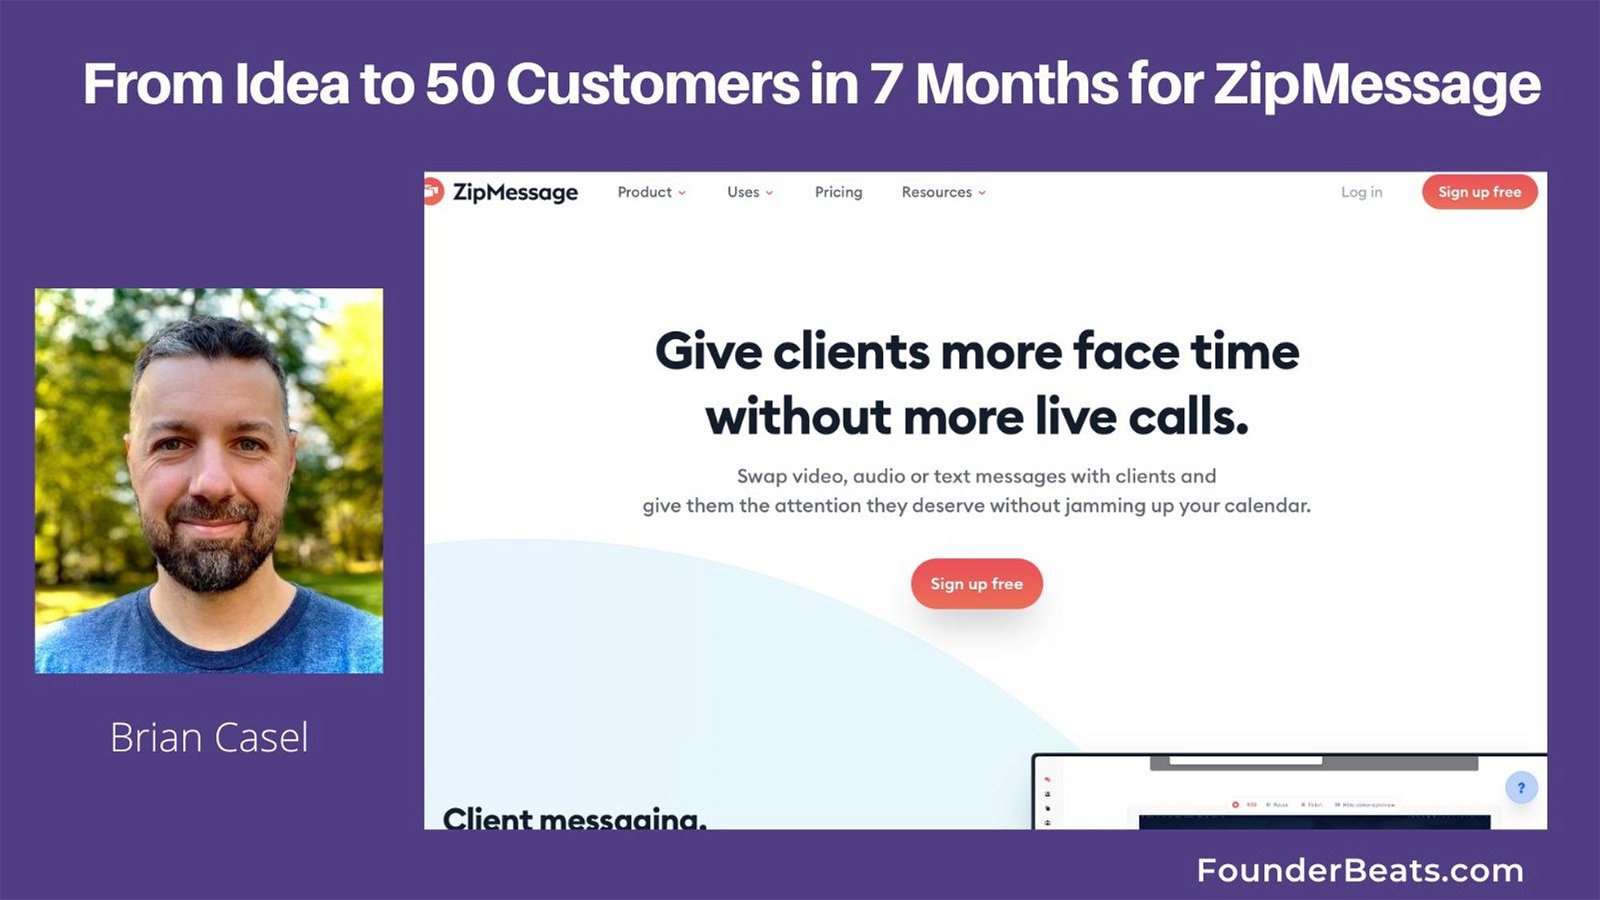 From Idea to 50 Customers in 7 Months for ZipMessage by Brian Casel